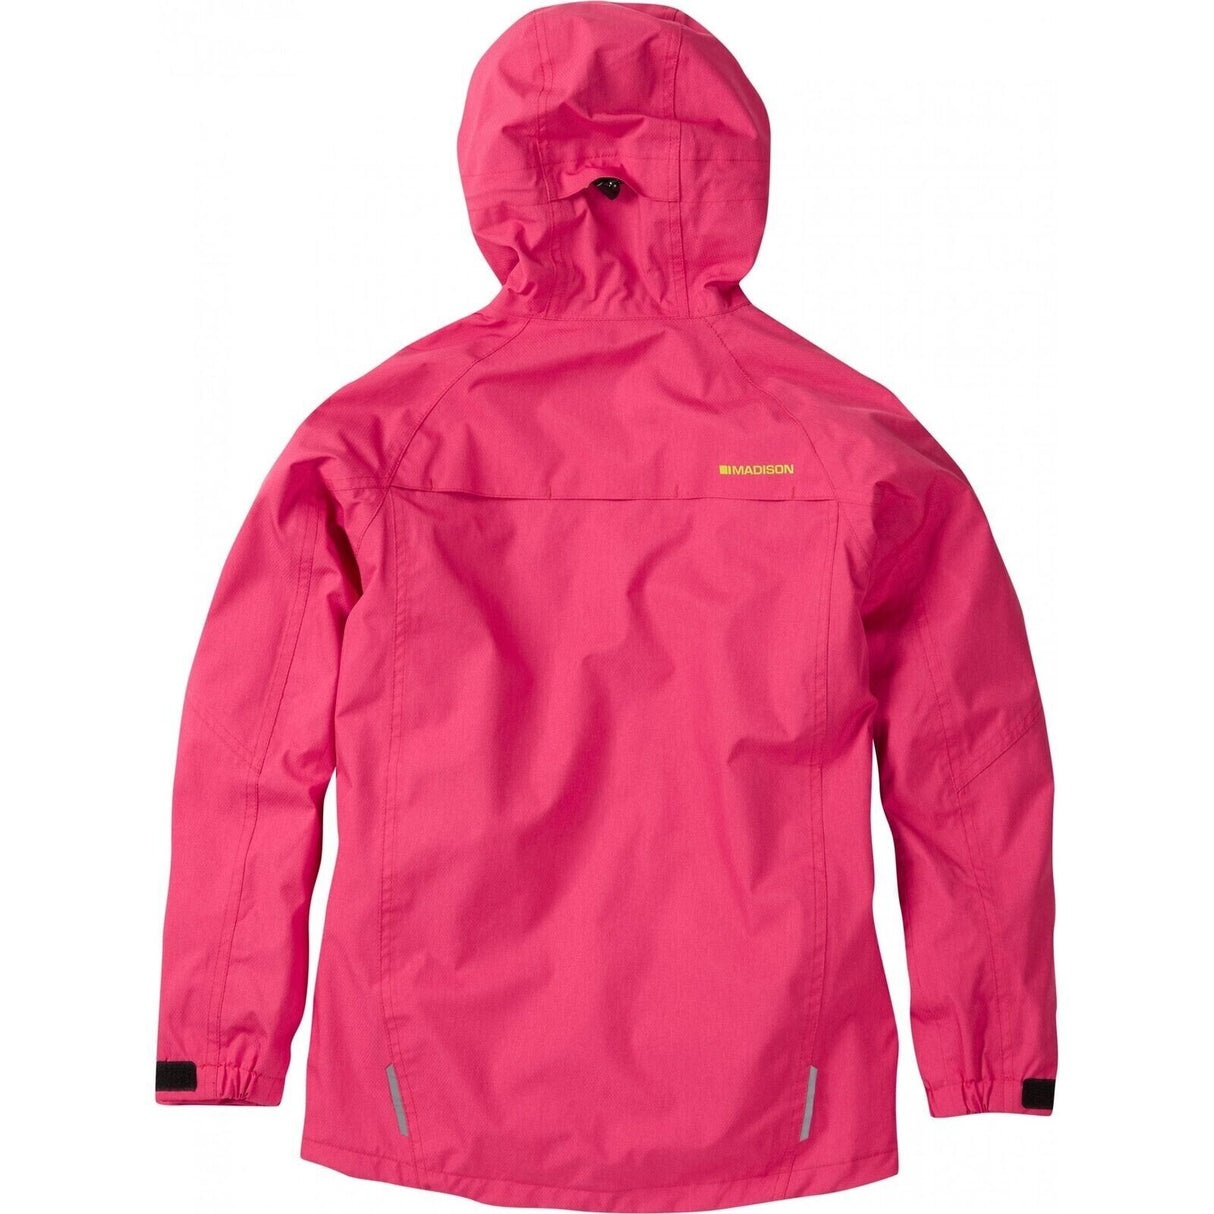 Madison Roam Youth Waterproof Cycling Jacket - Age 13 - 14 - Rose Red - Sportandleisure.com